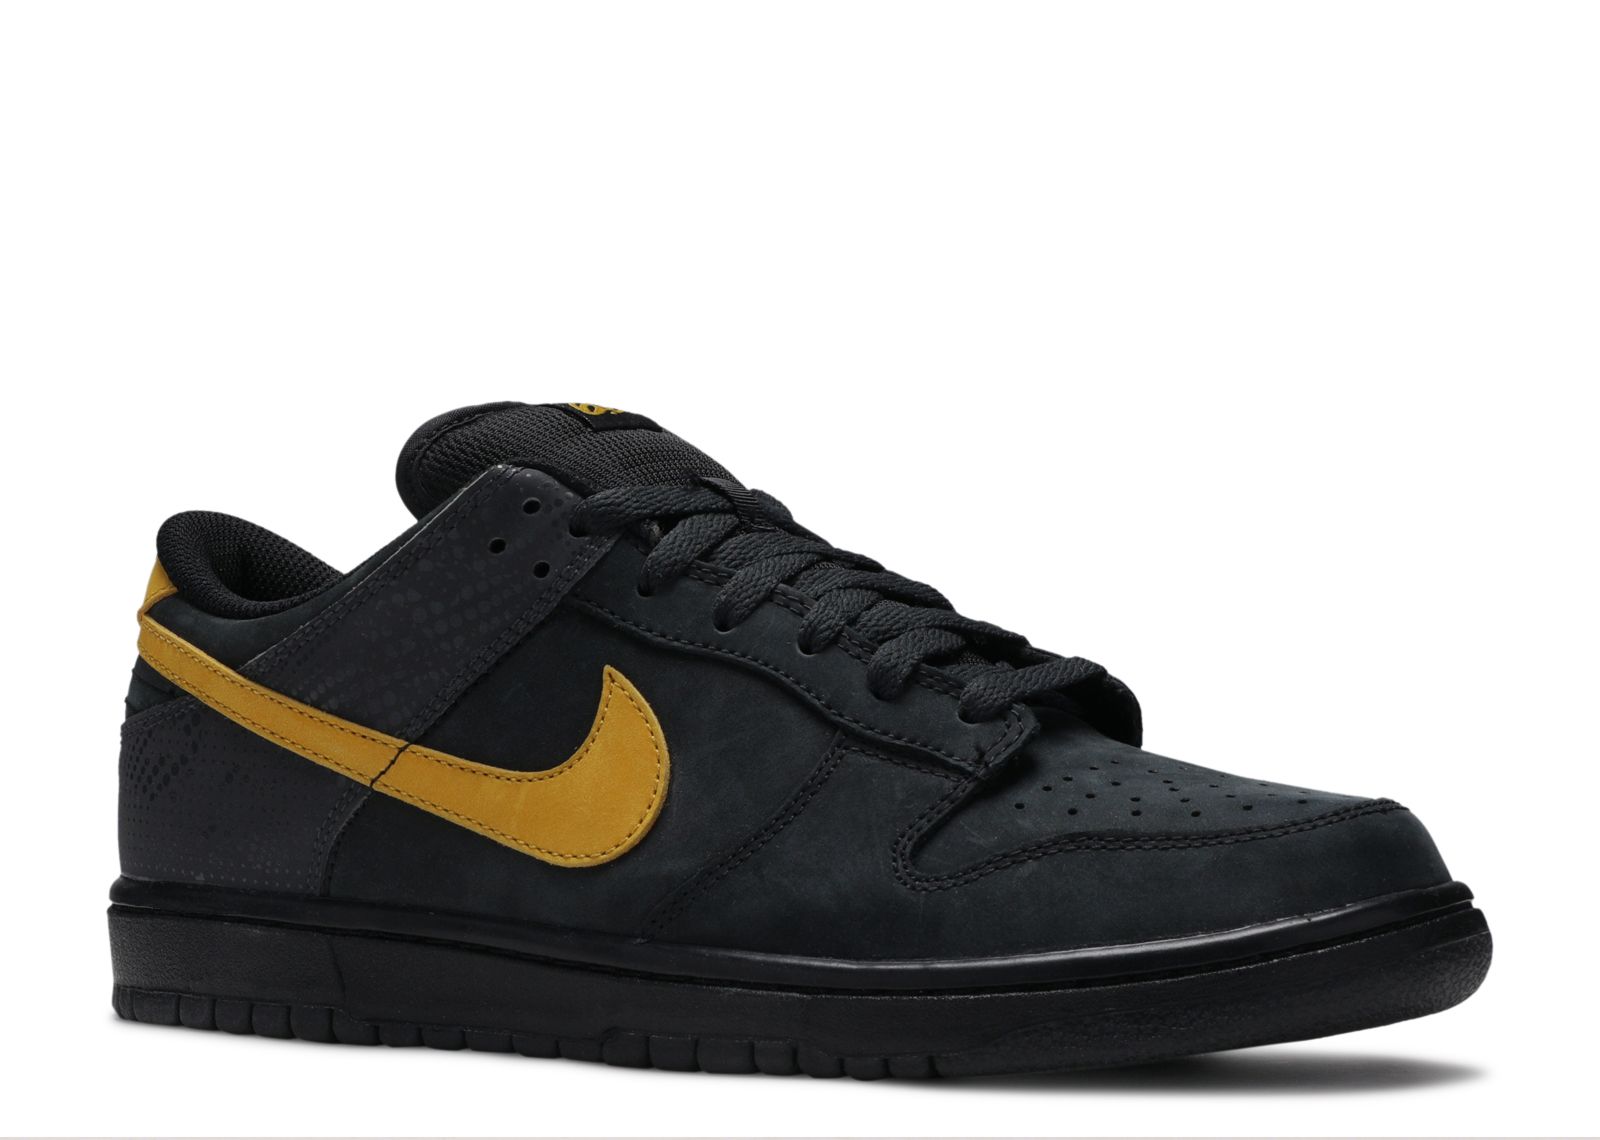 black and gold nike dunks